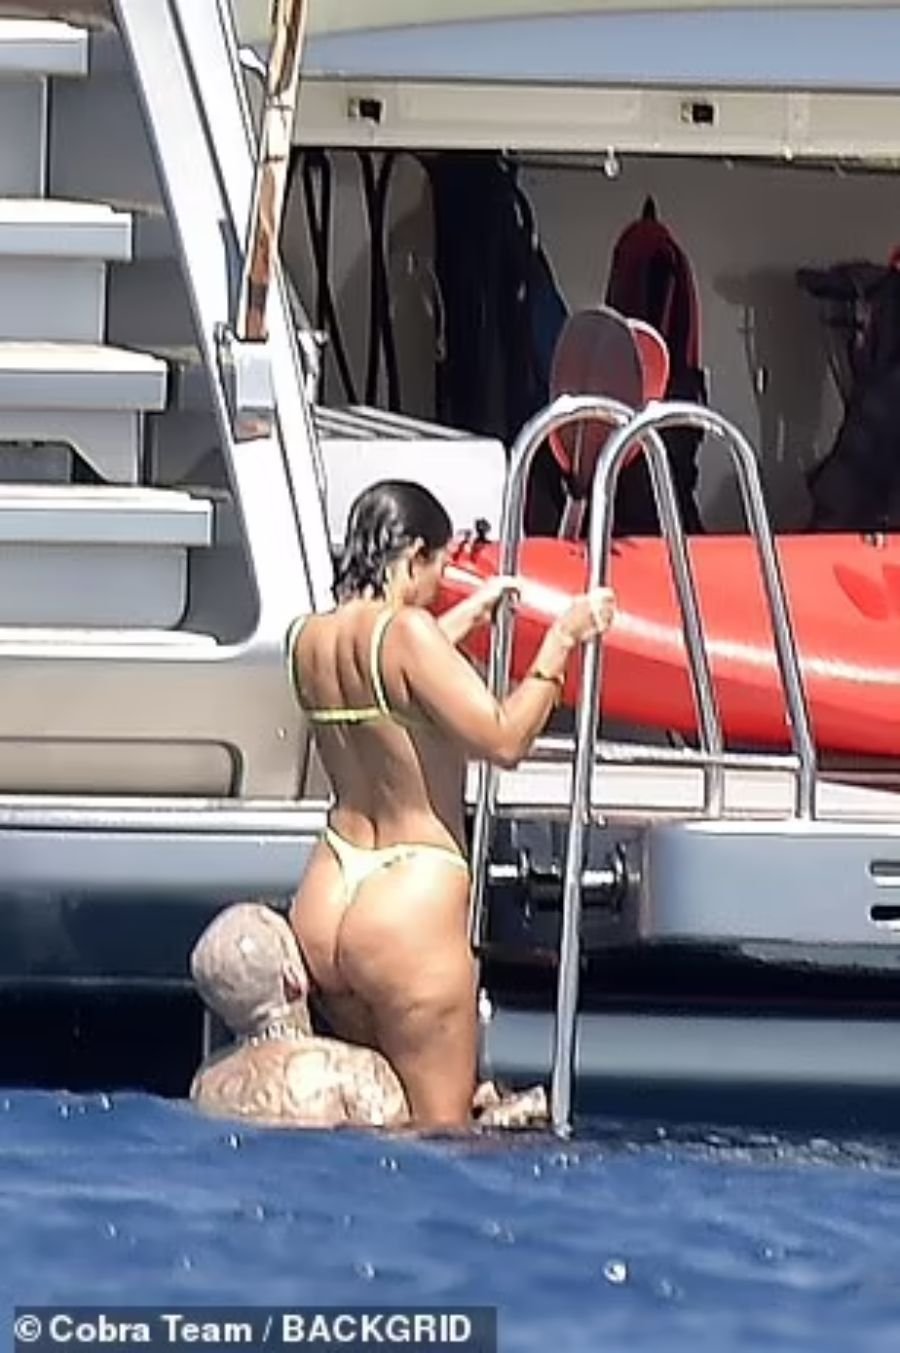 Kourtney Kardashian and Travis Barker on vacation in Italy - Passionate touches, bold poses